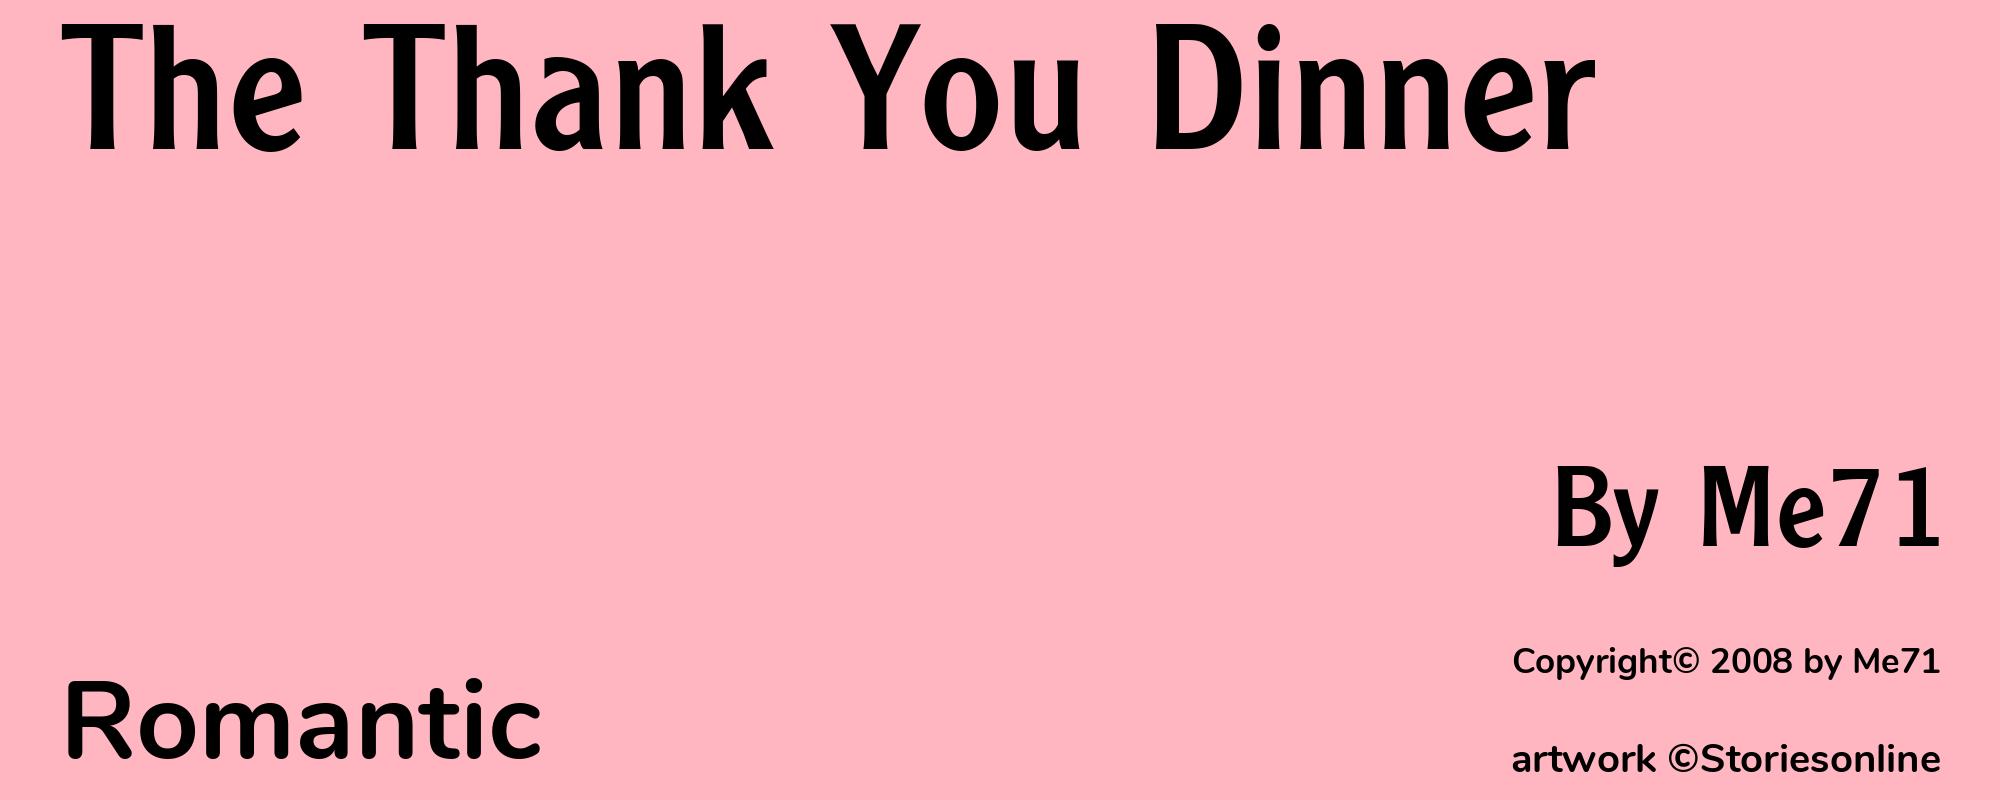 The Thank You Dinner - Cover